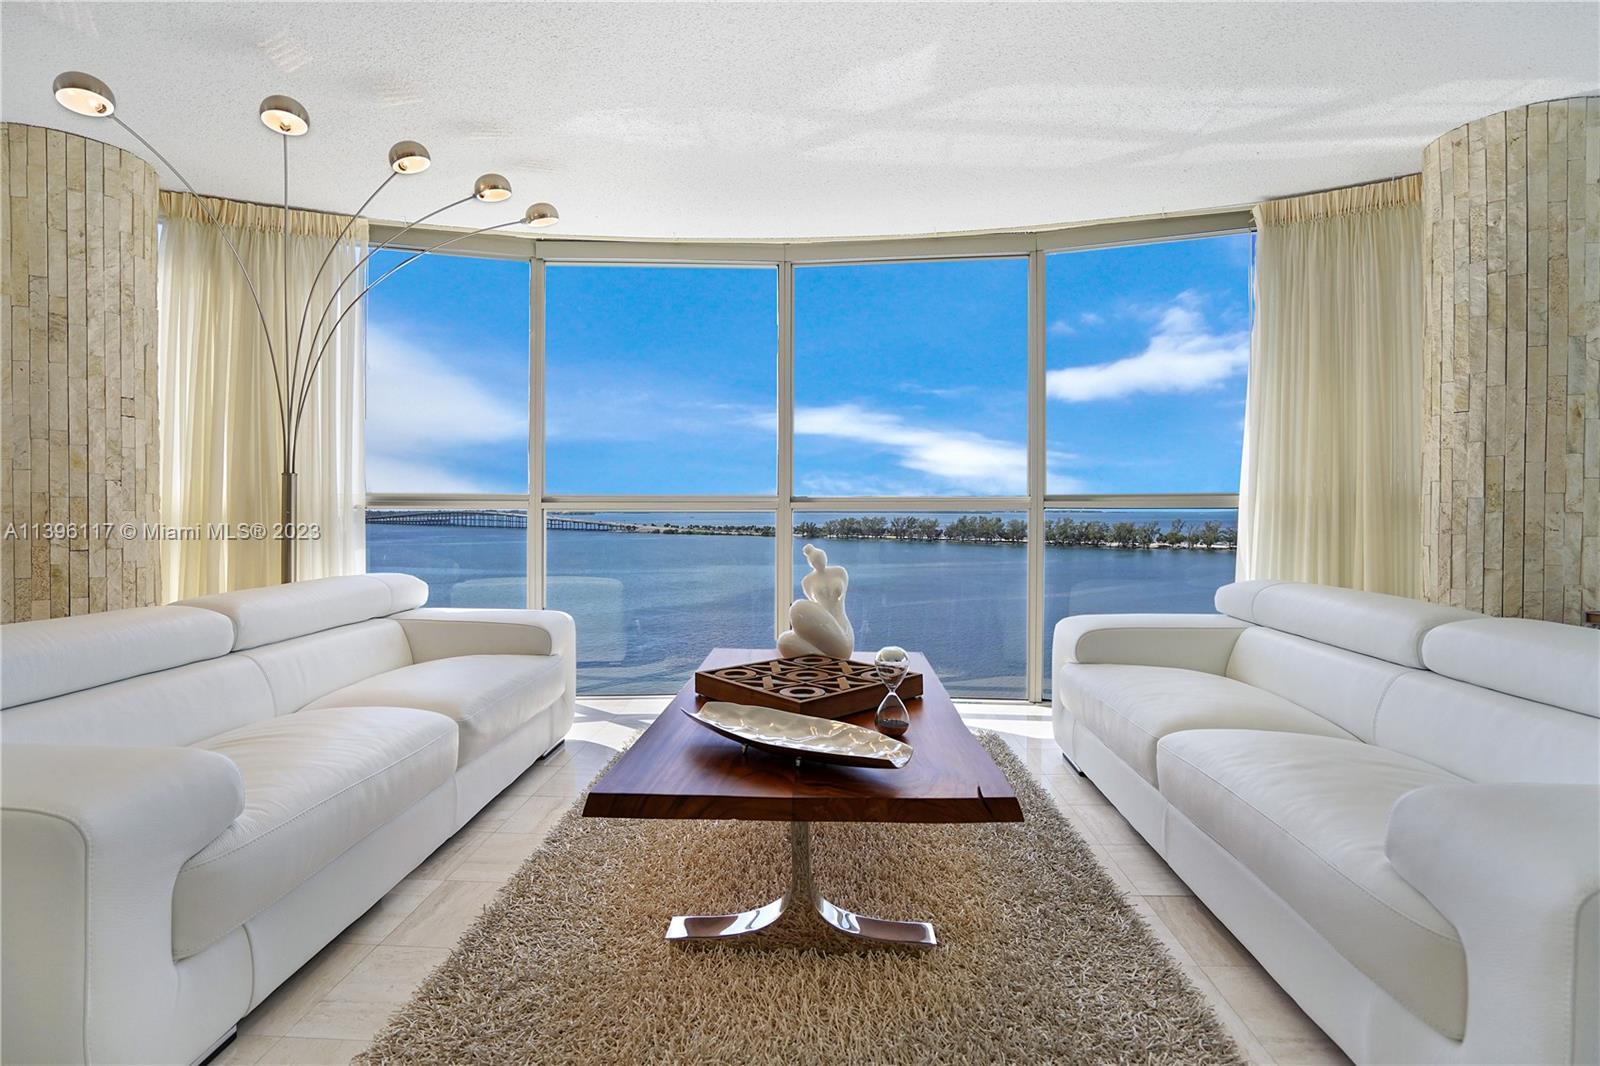 Breathtaking 180 degrees of uninterrupted views of the Biscayne Bay landscape from the living-dining